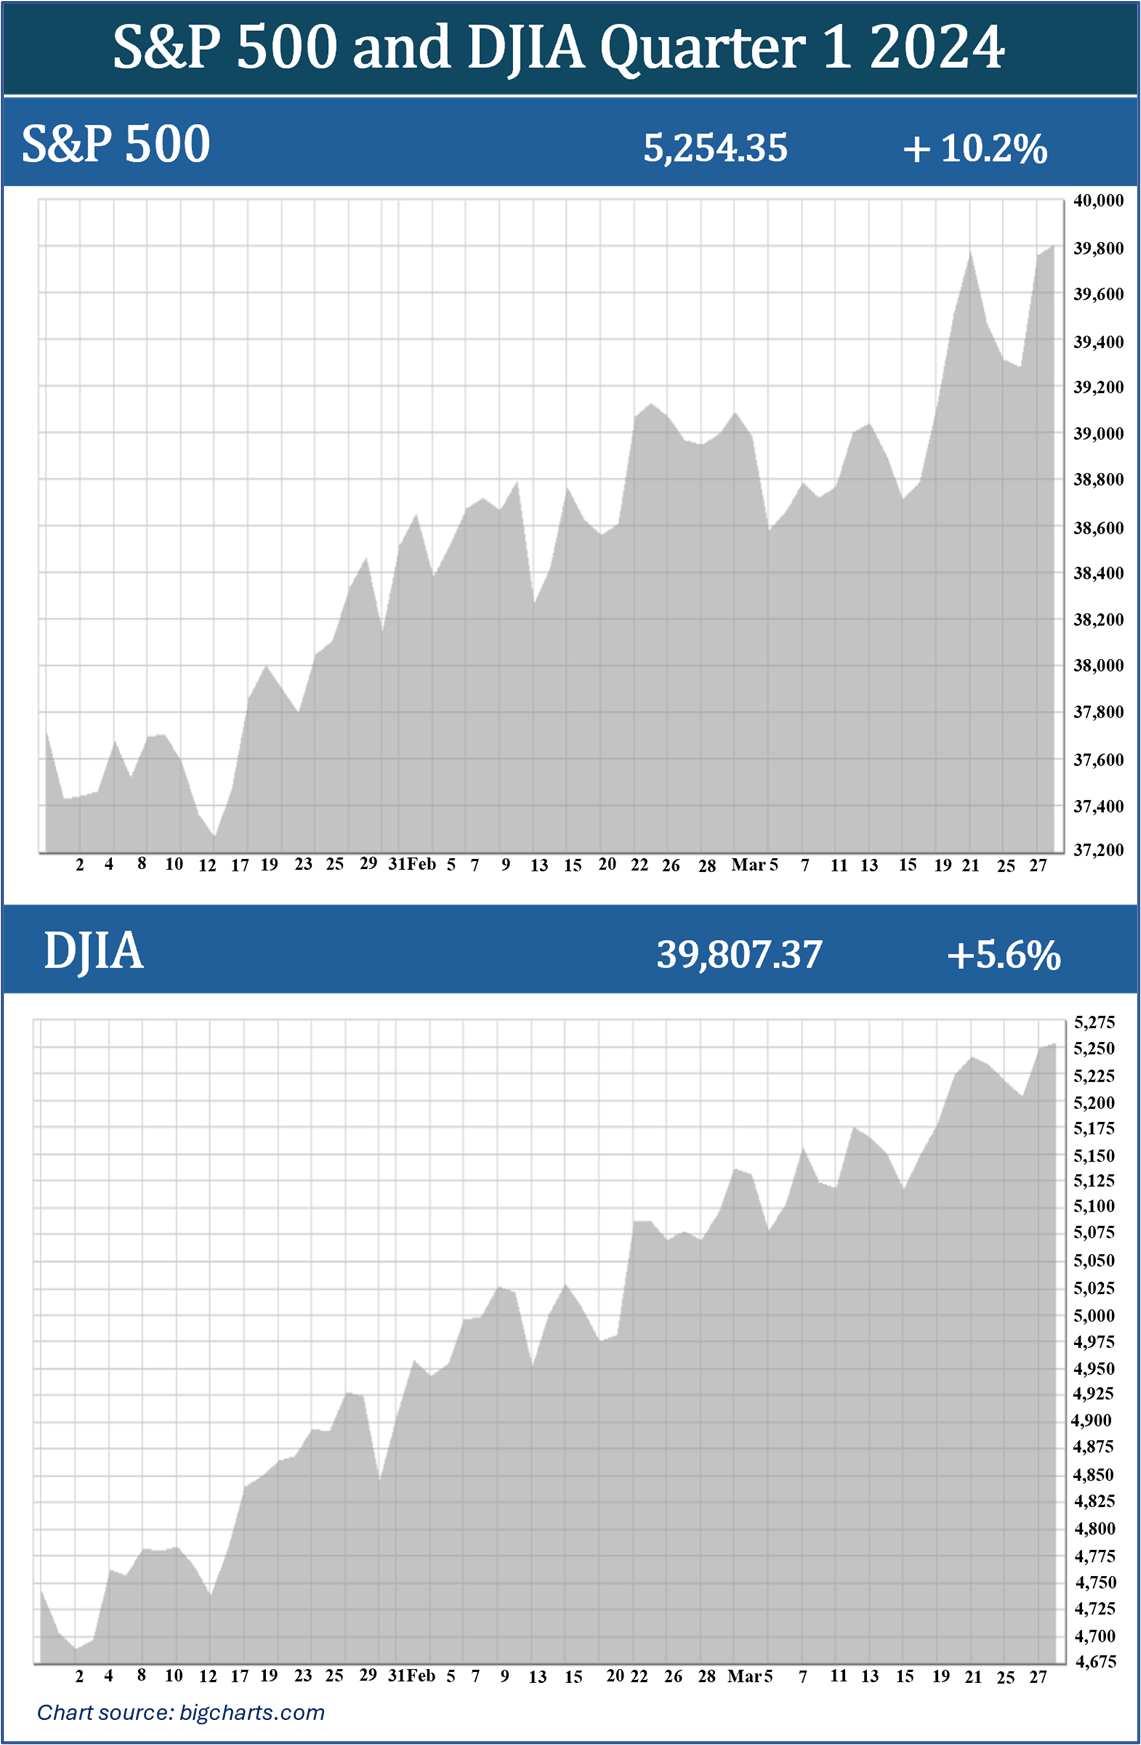 S&P 500 and DJIA Quarter 1 2024